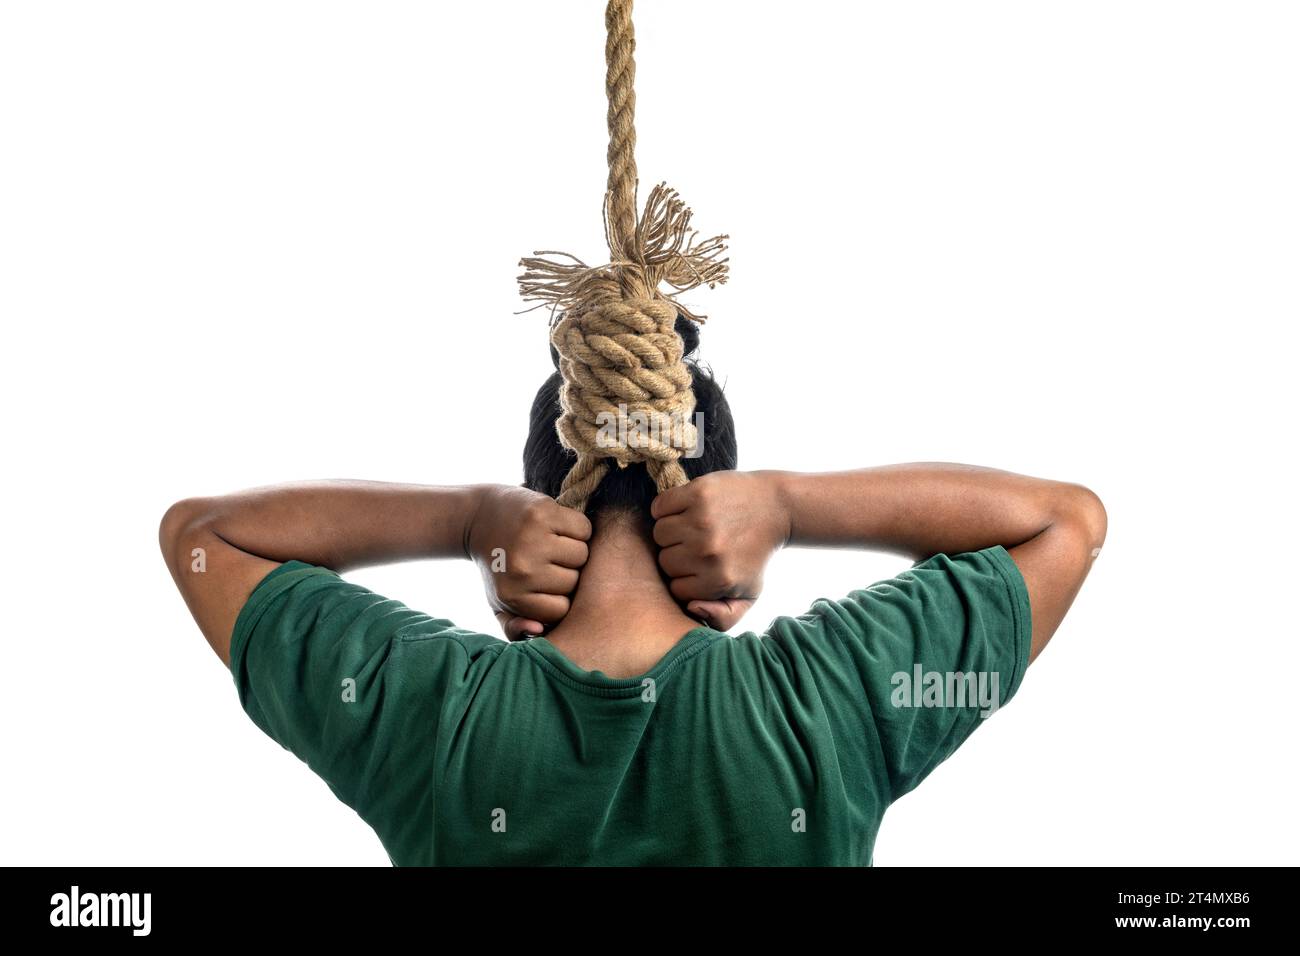 Man hanged in rope with a hangman noose knot isolated over white background Stock Photo